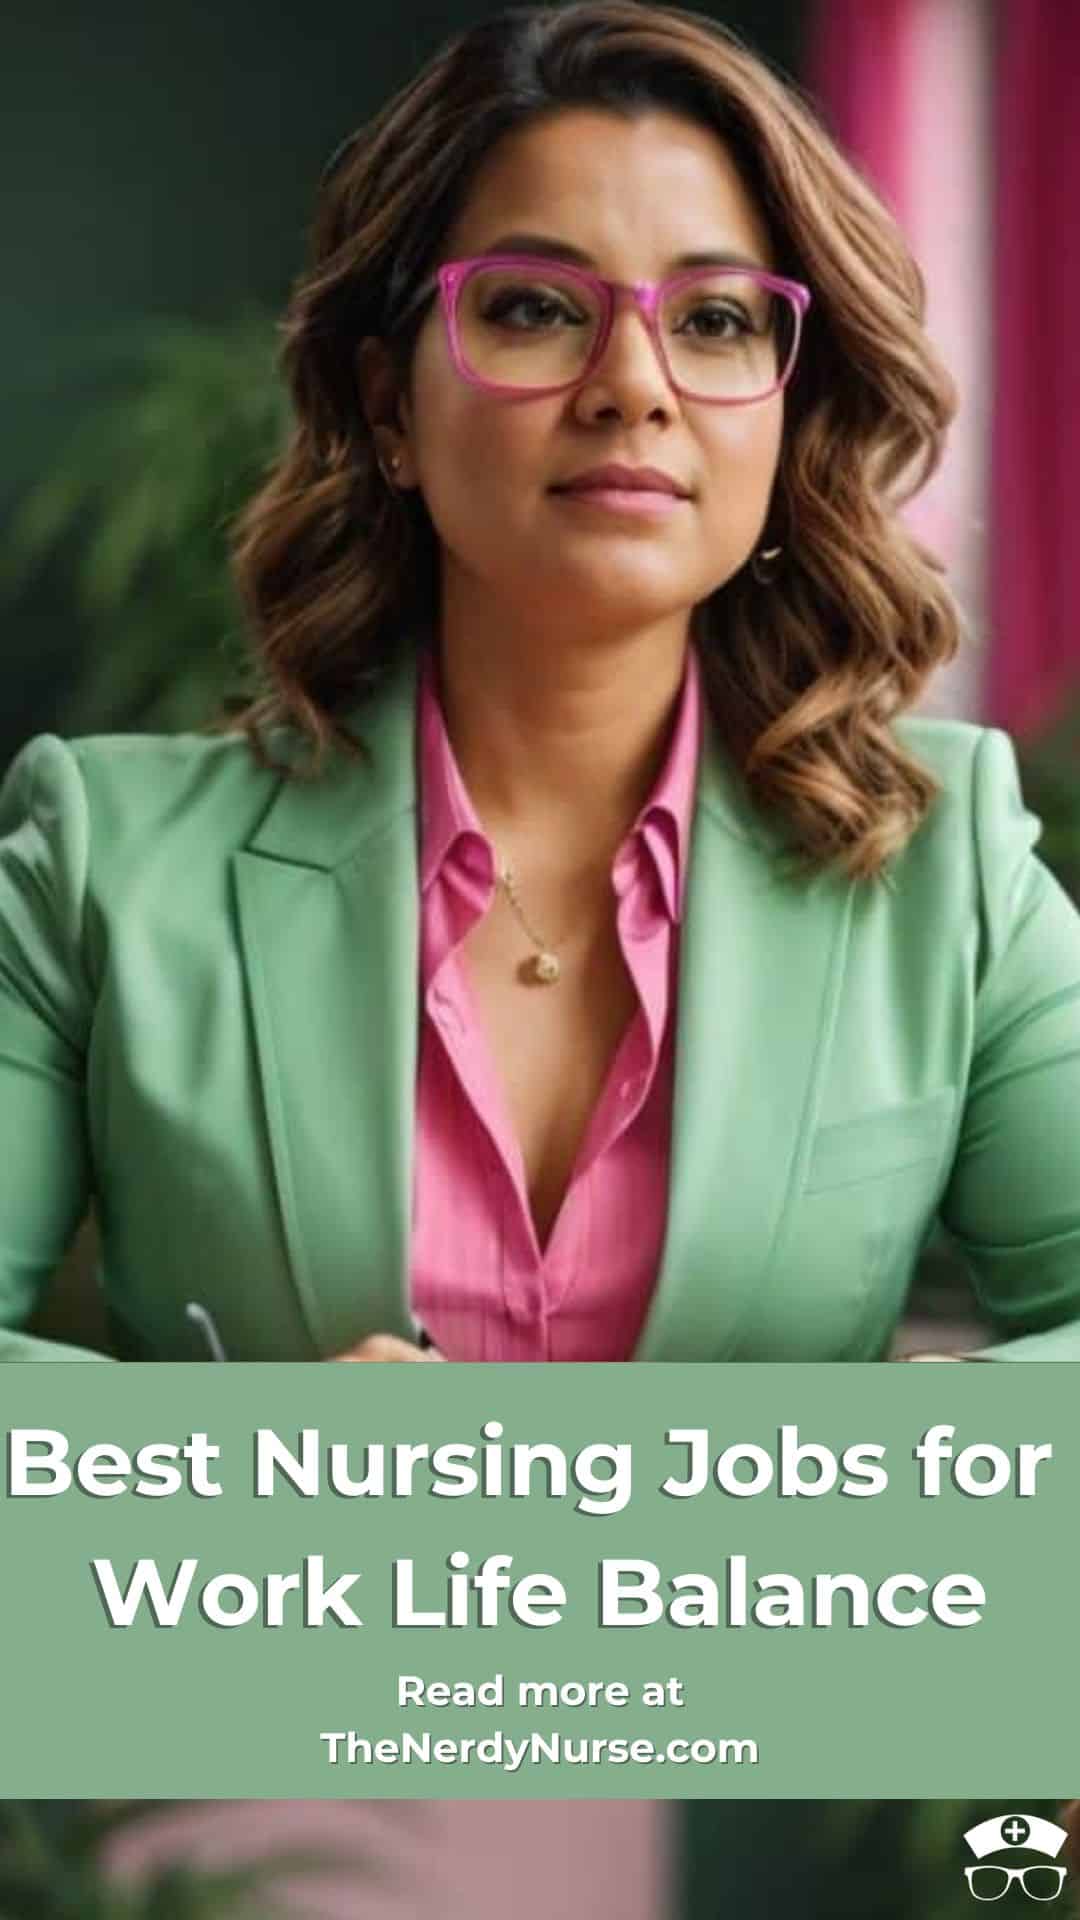 Best Nursing Jobs for Work Life Balance: Increase Your Earnings While ...